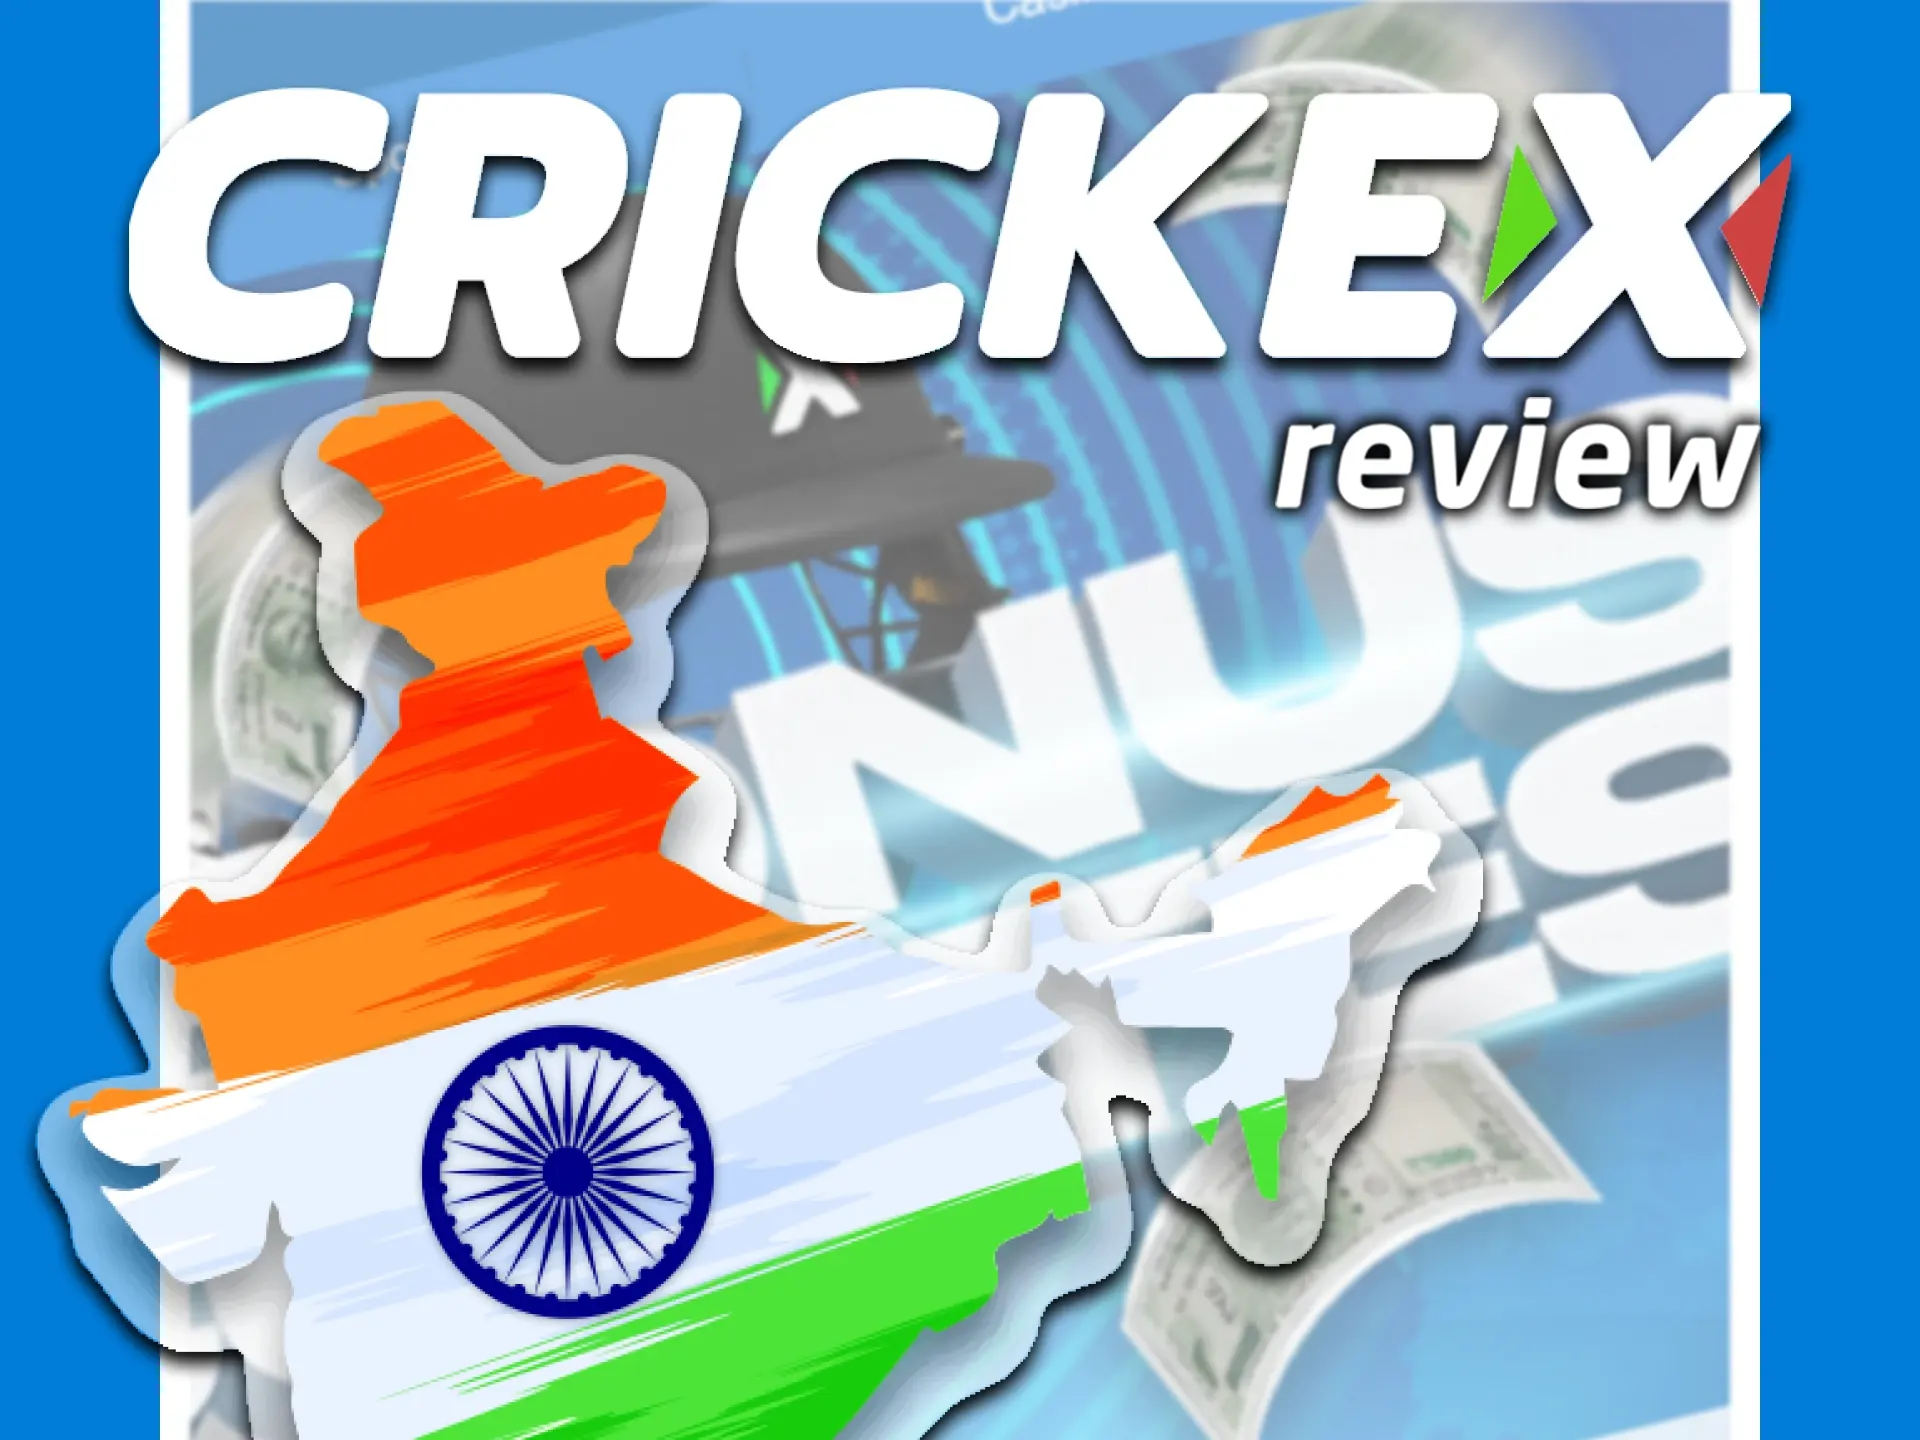 Learn in which territories of India the Crickex service is allowed.